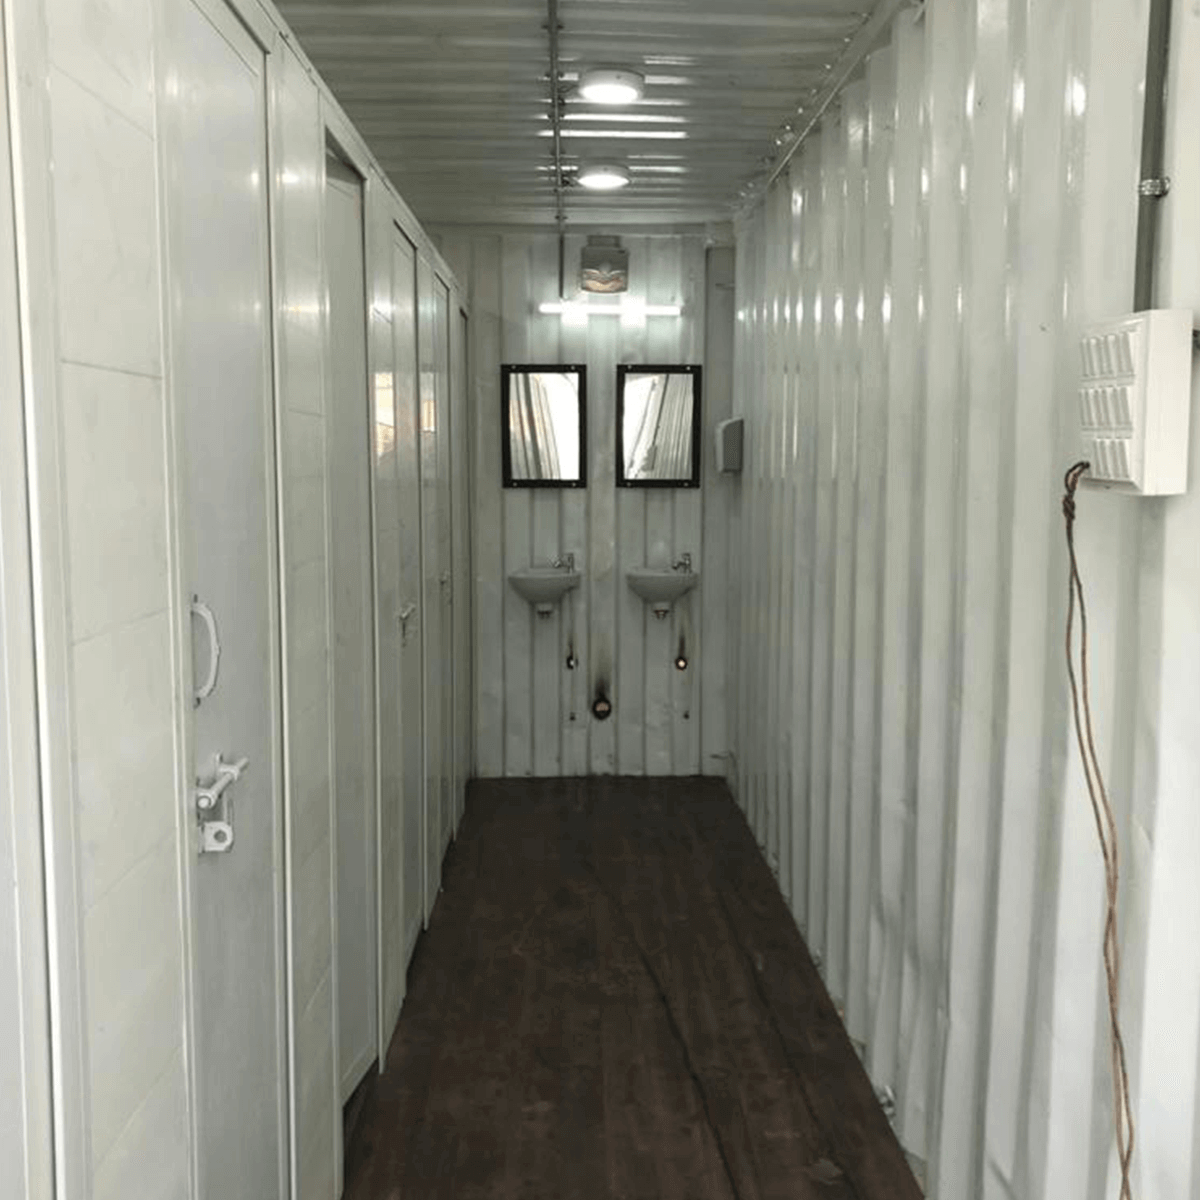 Container Toilet